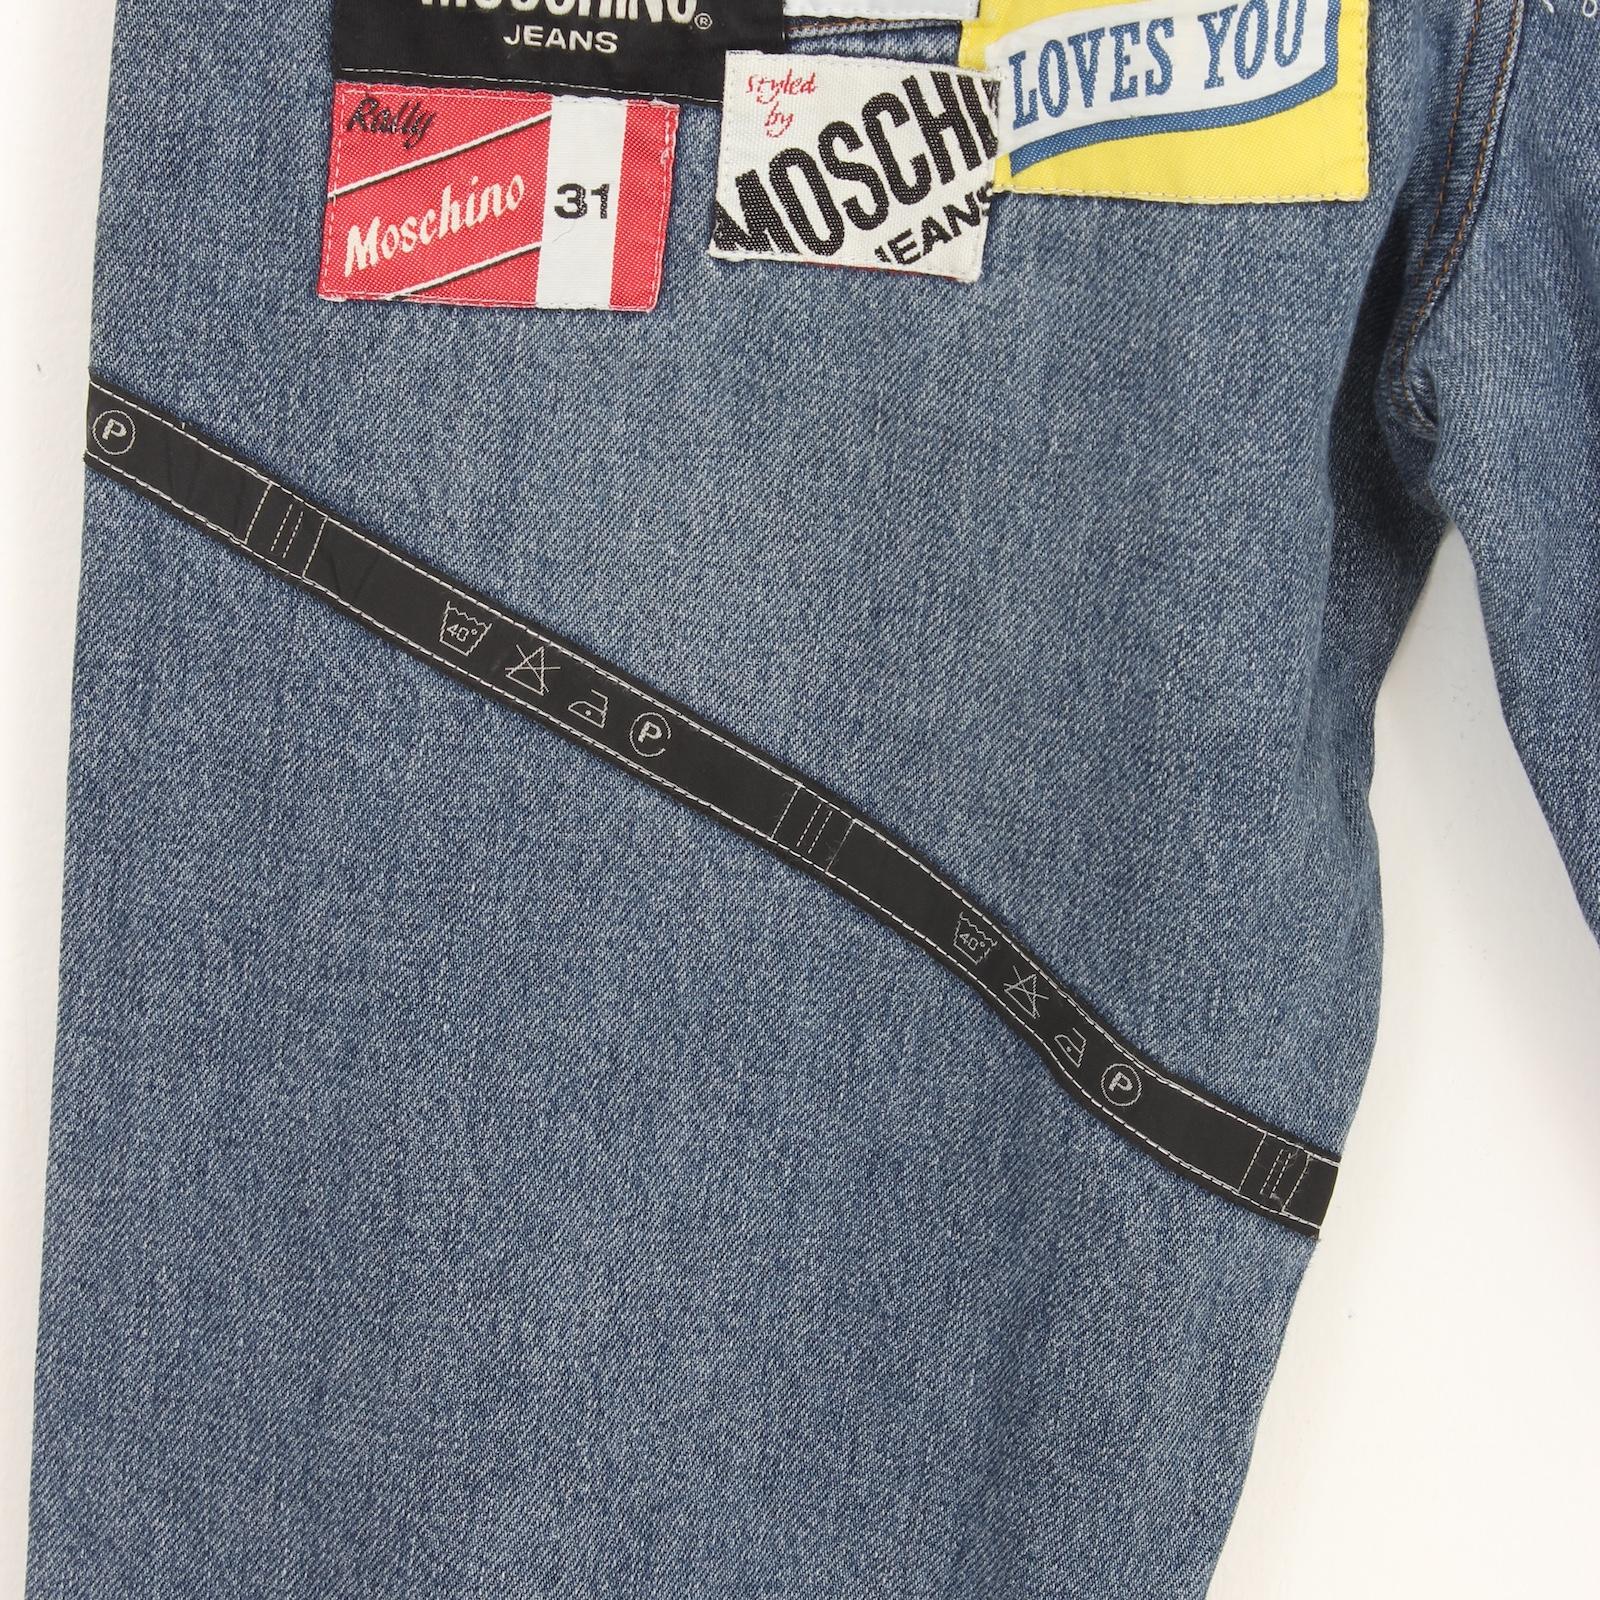 Moschino Patchwork Blue Jeans 2000s For Sale 1